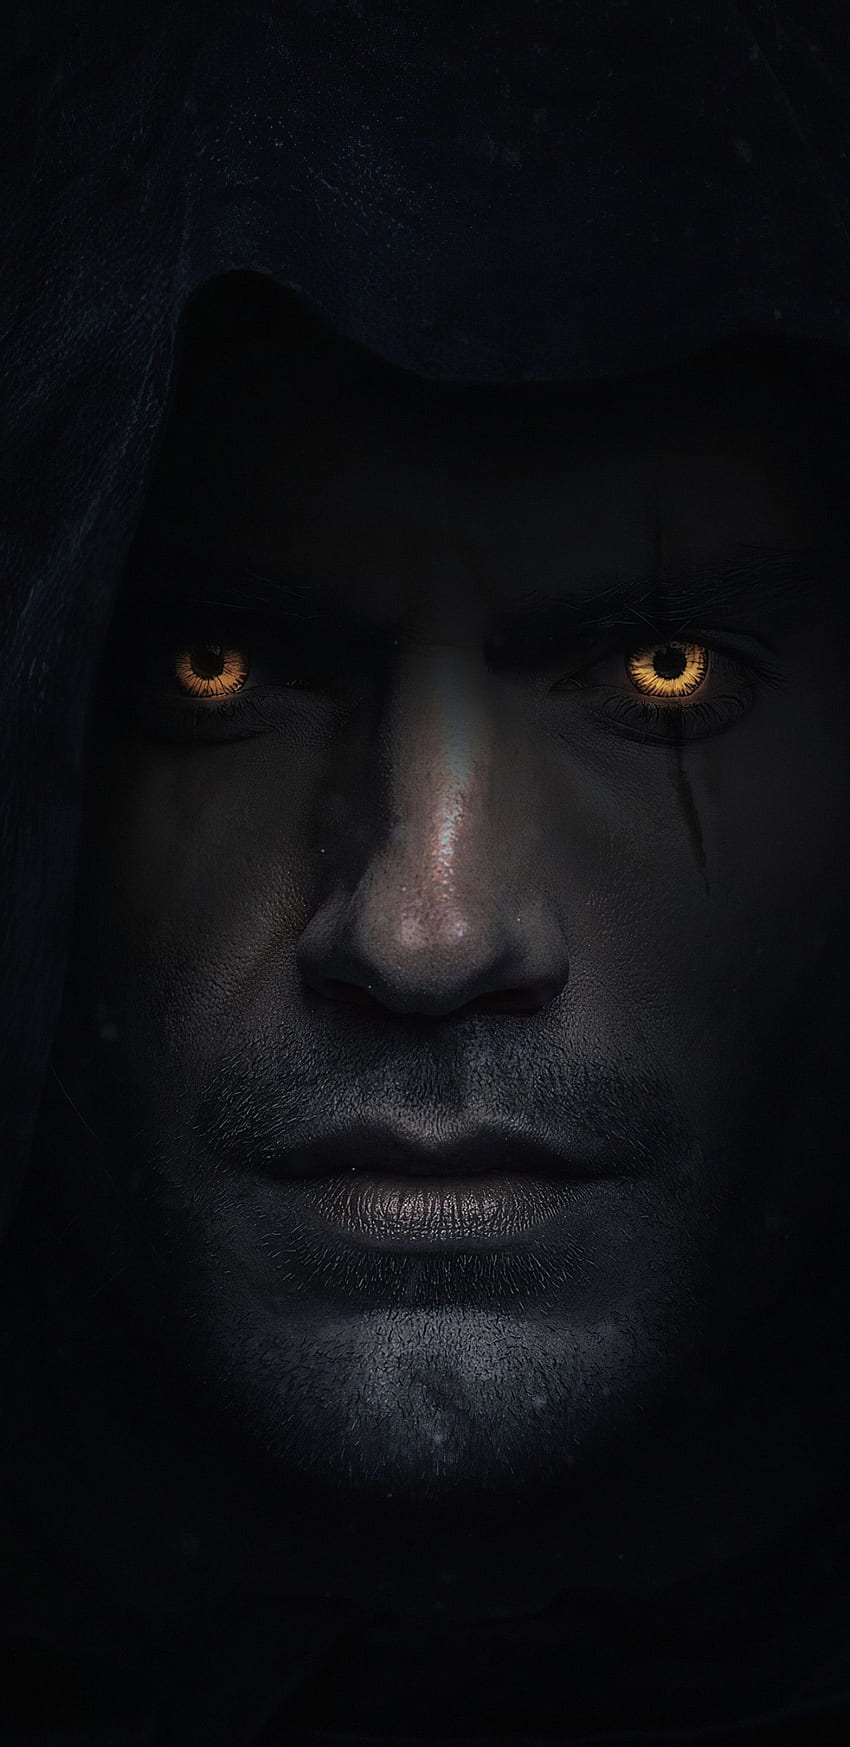 Witcher Henry Cavill Samsung Galaxy Note 9, 8, S9, S8 HD phone wallpaper